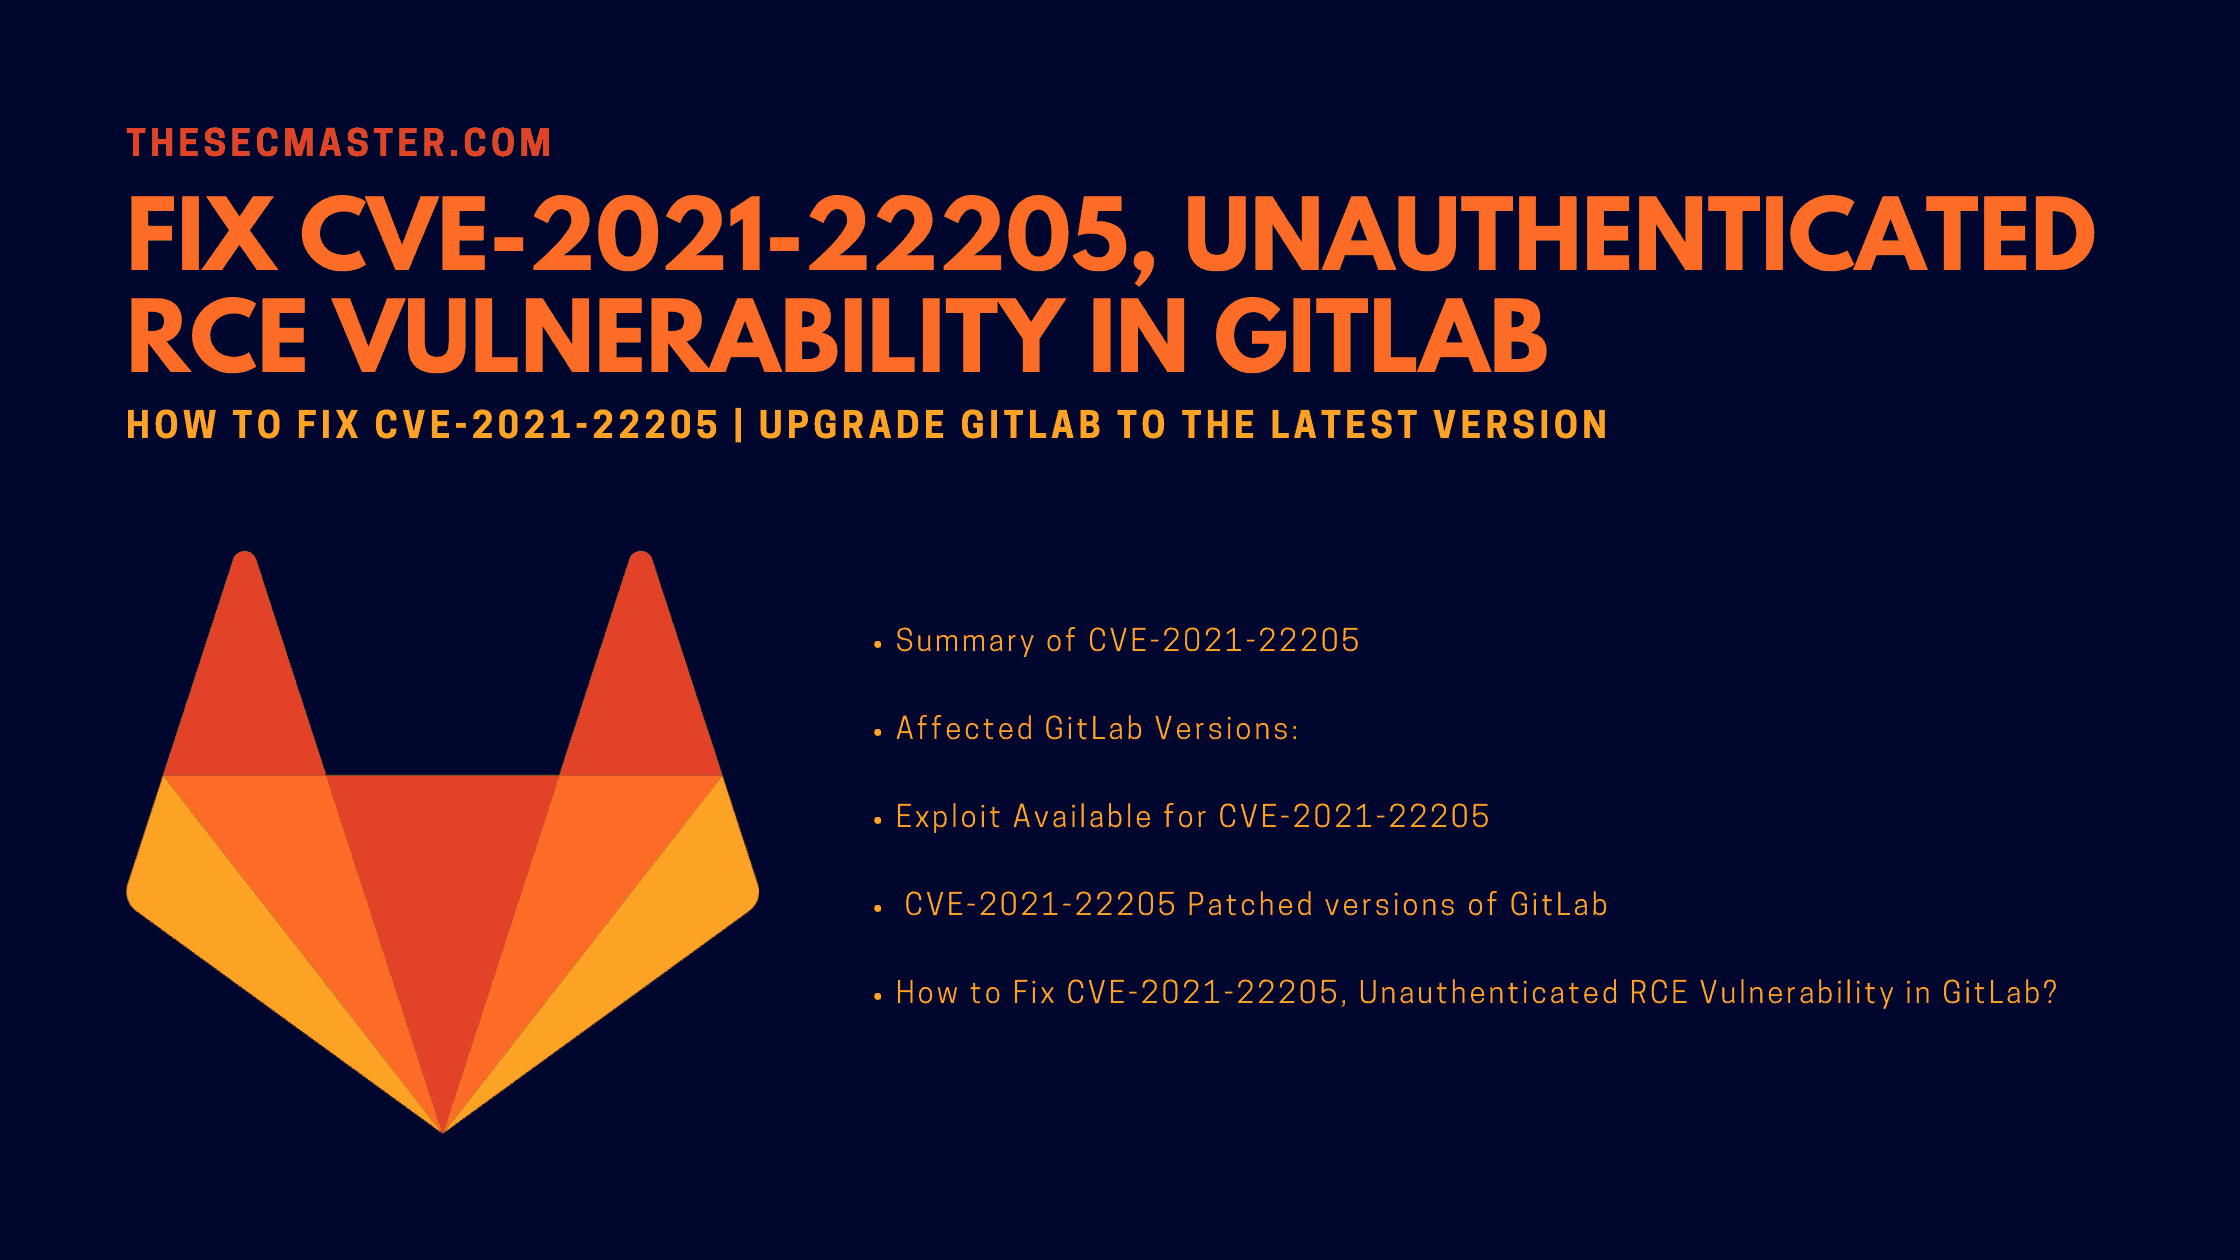 How To Fix Cve 2021 22205 Unauthenticated Rce Vulnerability In Gitlab